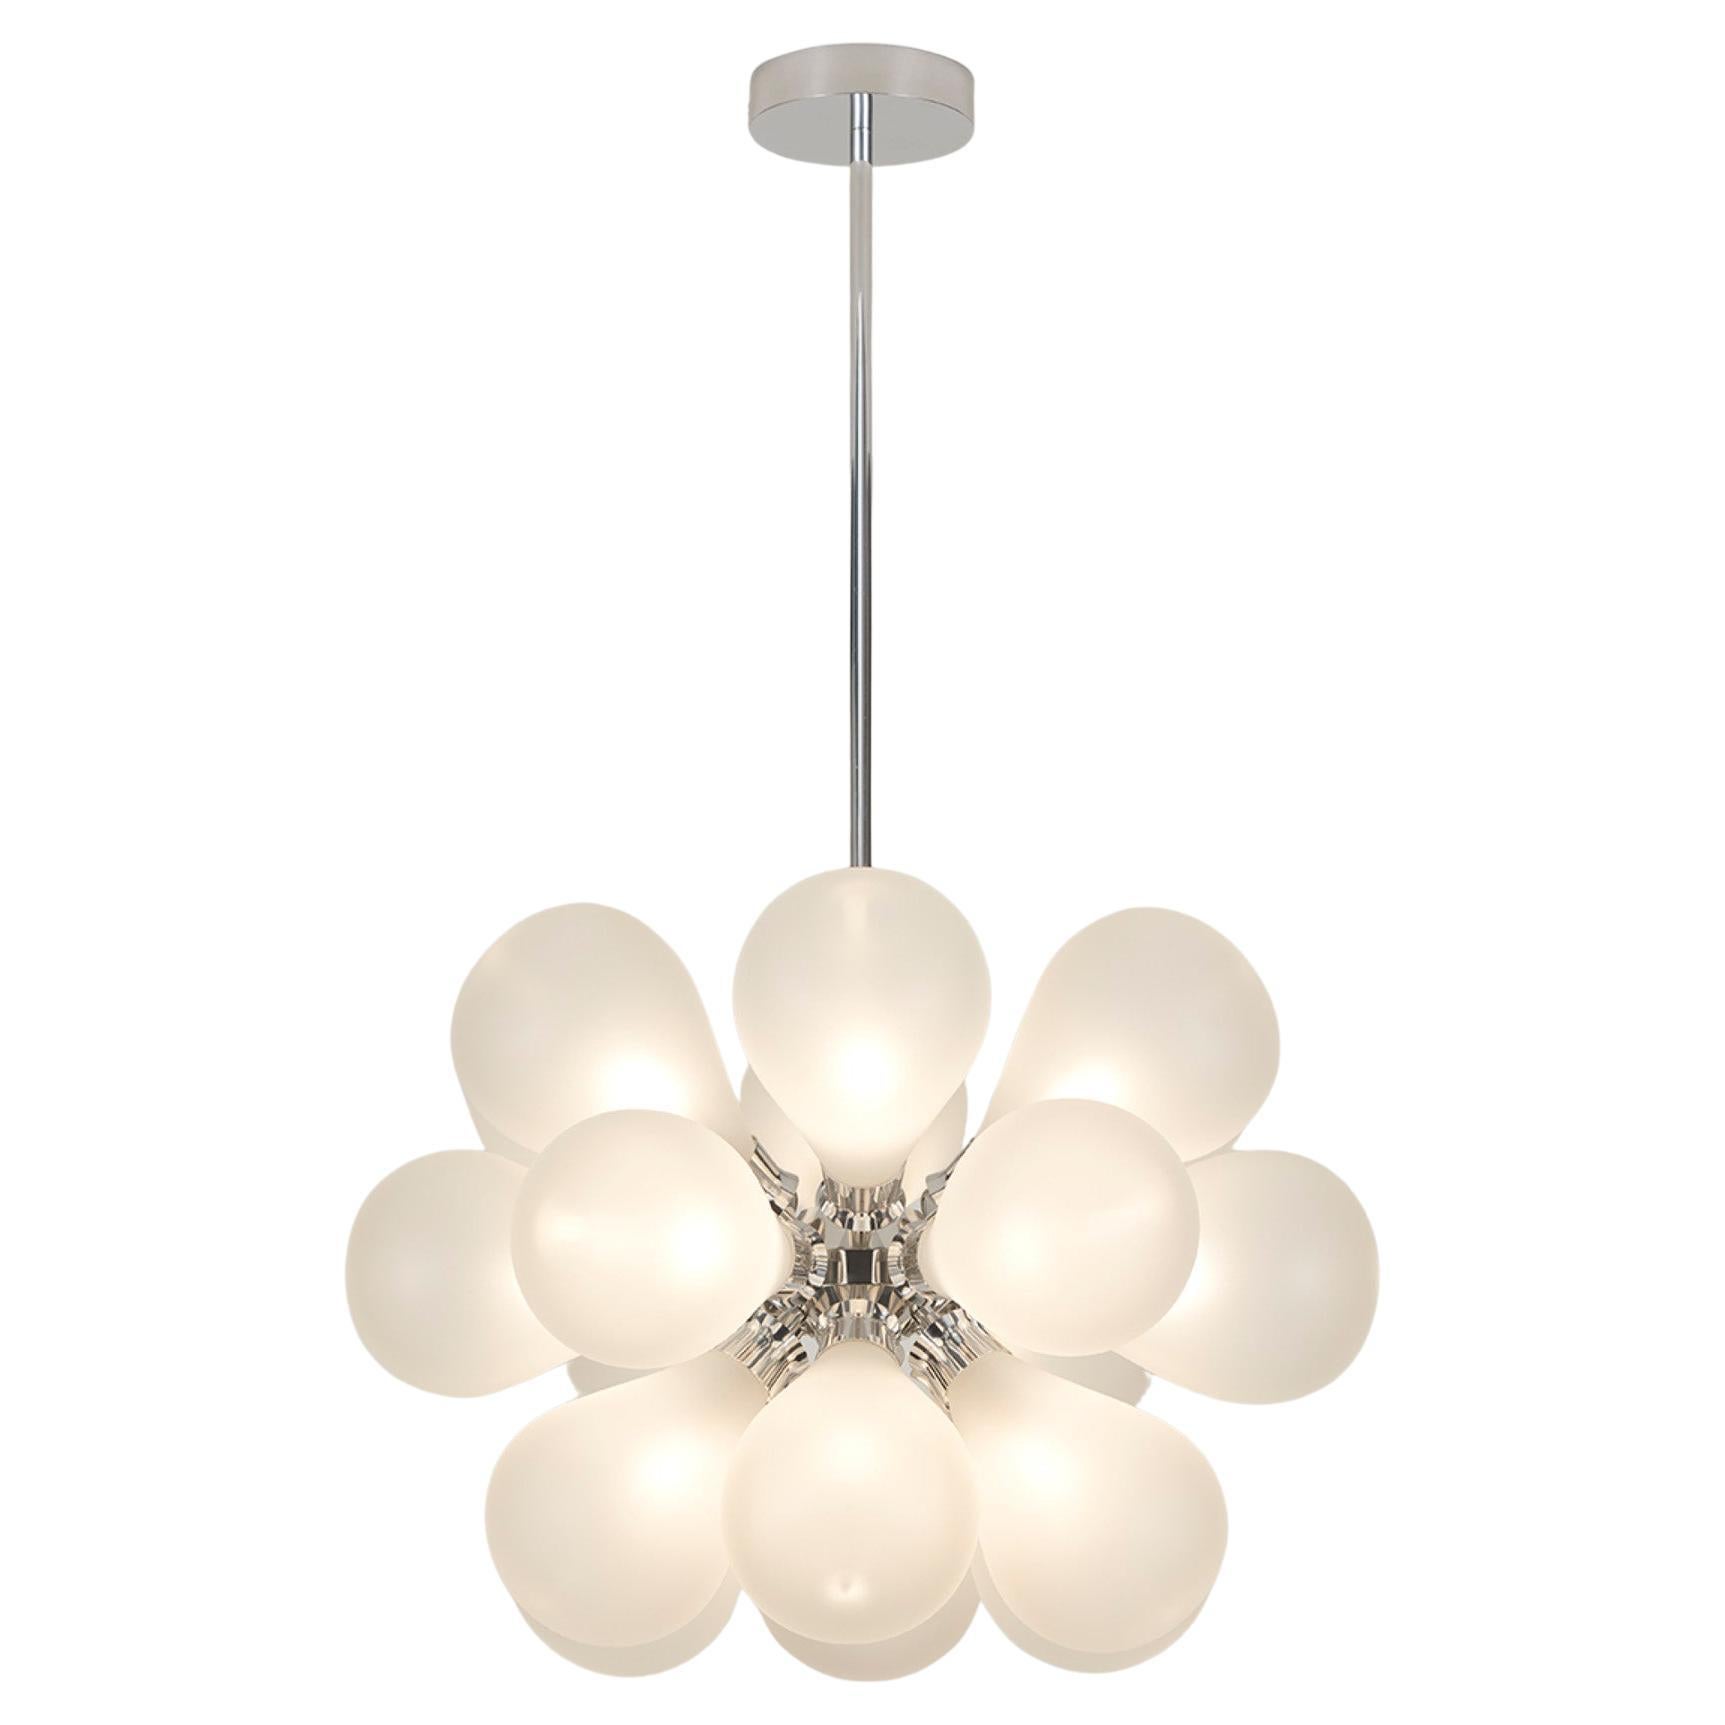 Cintola Maxi Pendant in Polished Aluminium with 18 Handblown Frosted Globes